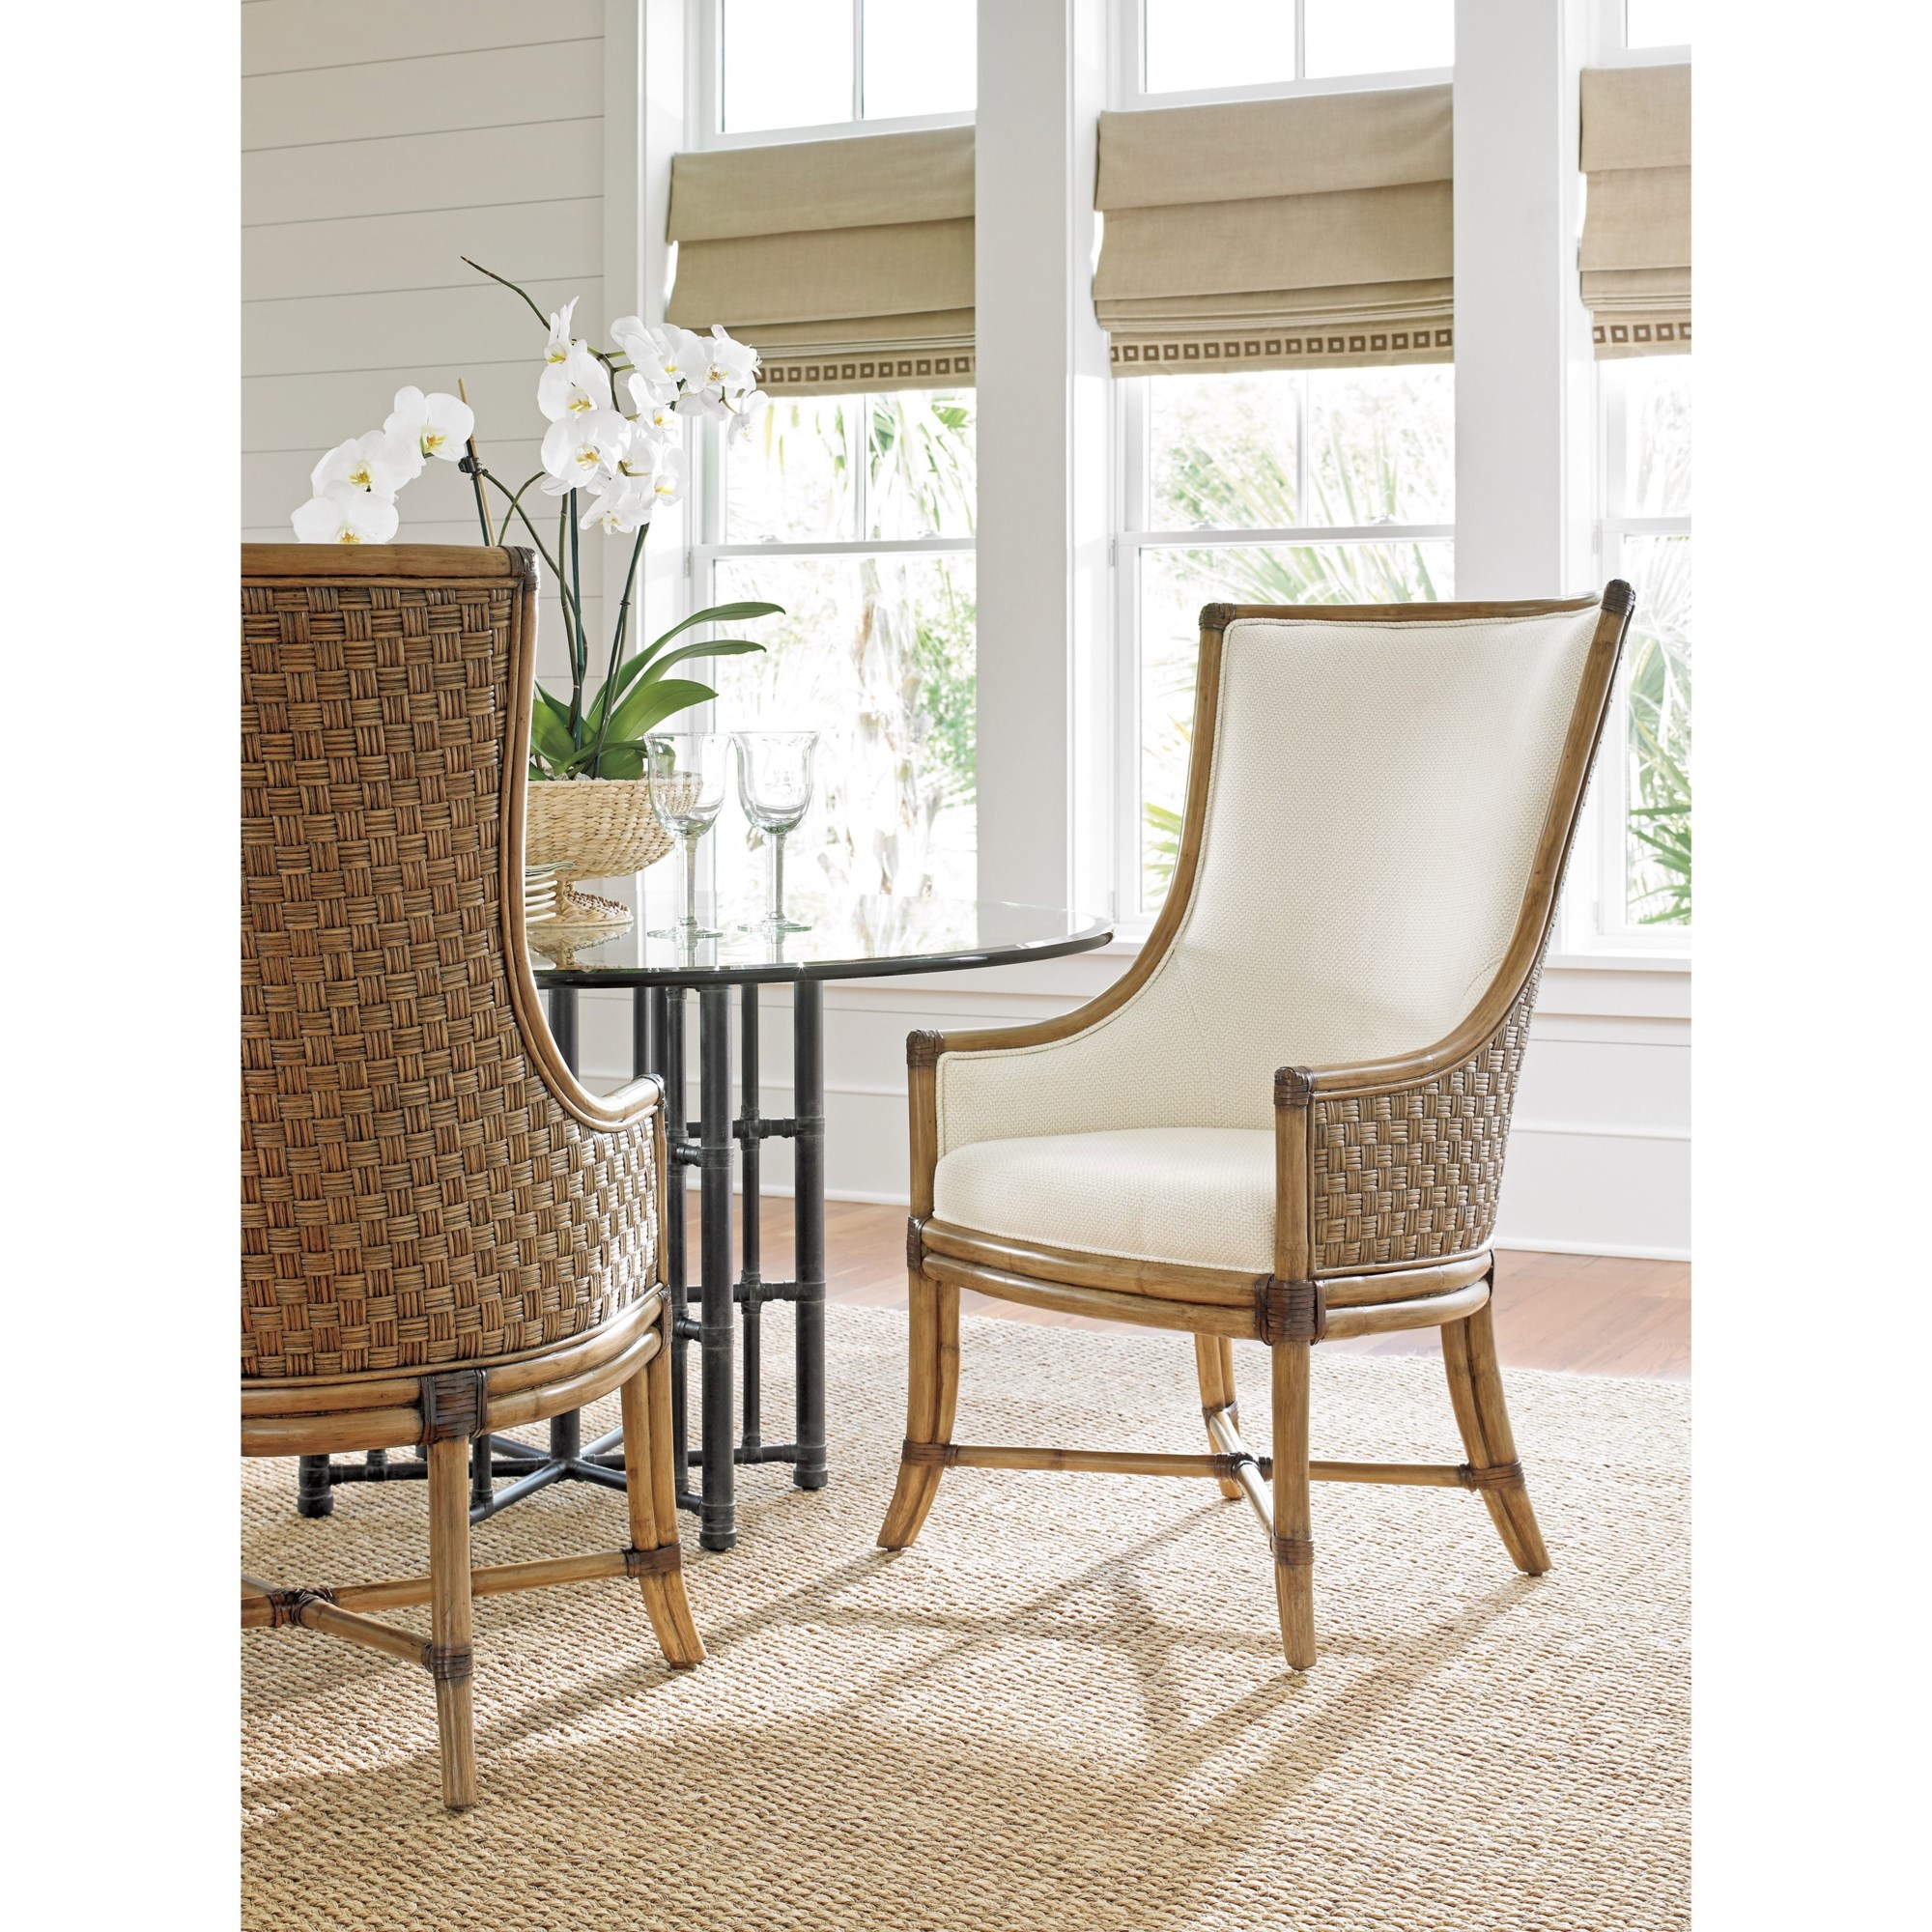 | Furniture Ivory Home Sand Balfour Arm Fabric in 558-885-01 Belfort | Chairs Tommy Dining Dollar Bahama Twin Palms Chair Host Rattan Woven